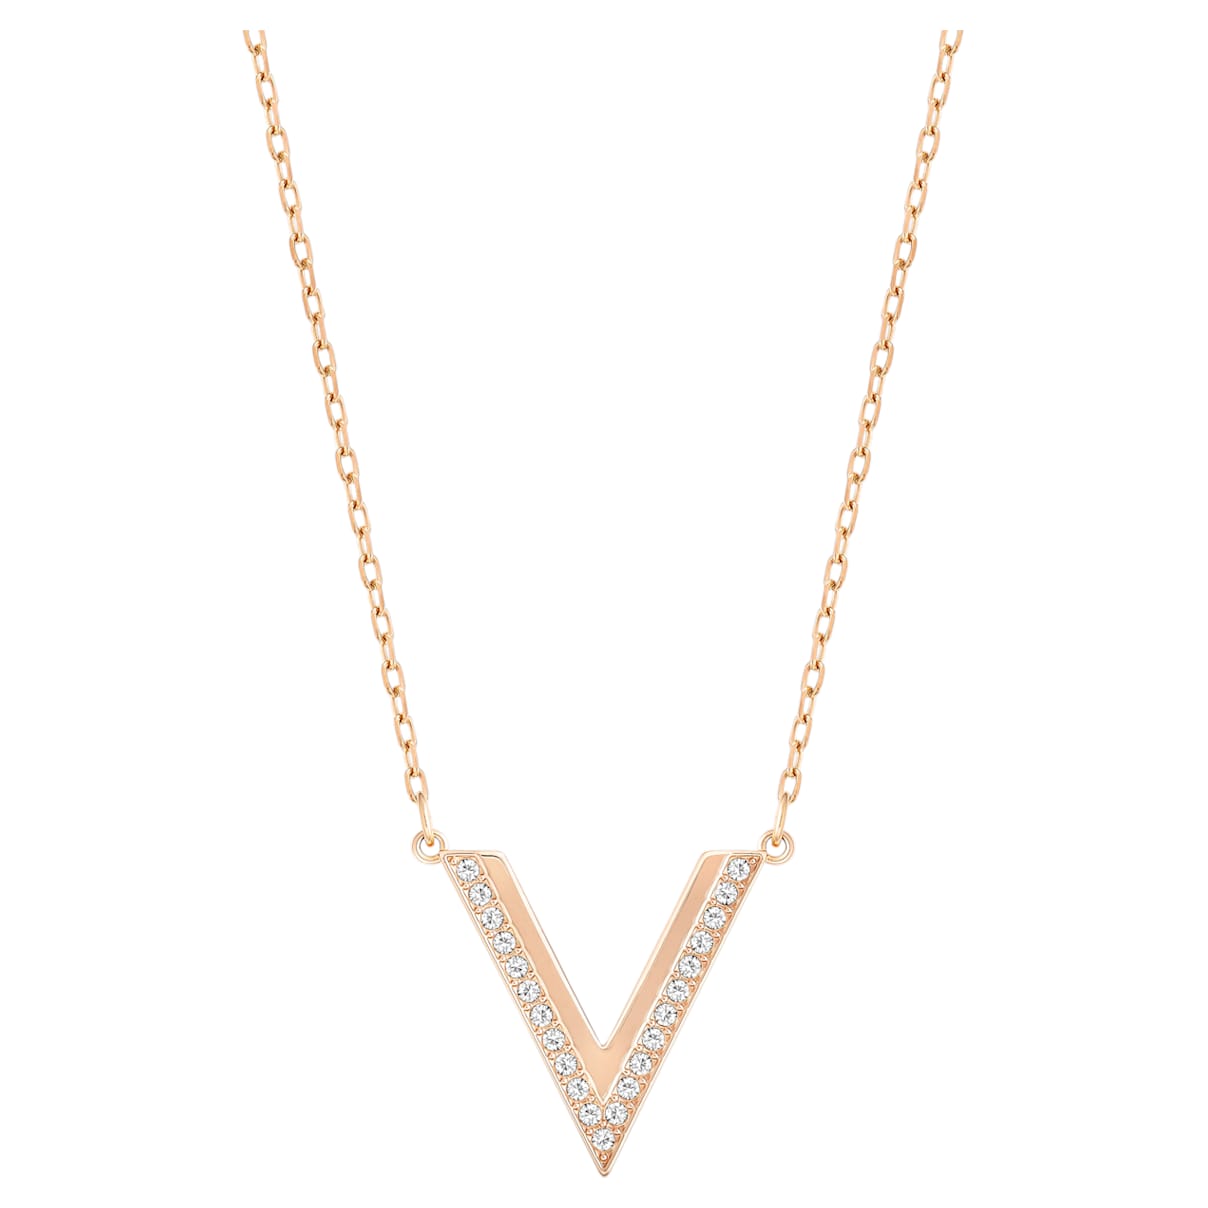 Delta necklace White, Rose-gold tone plated